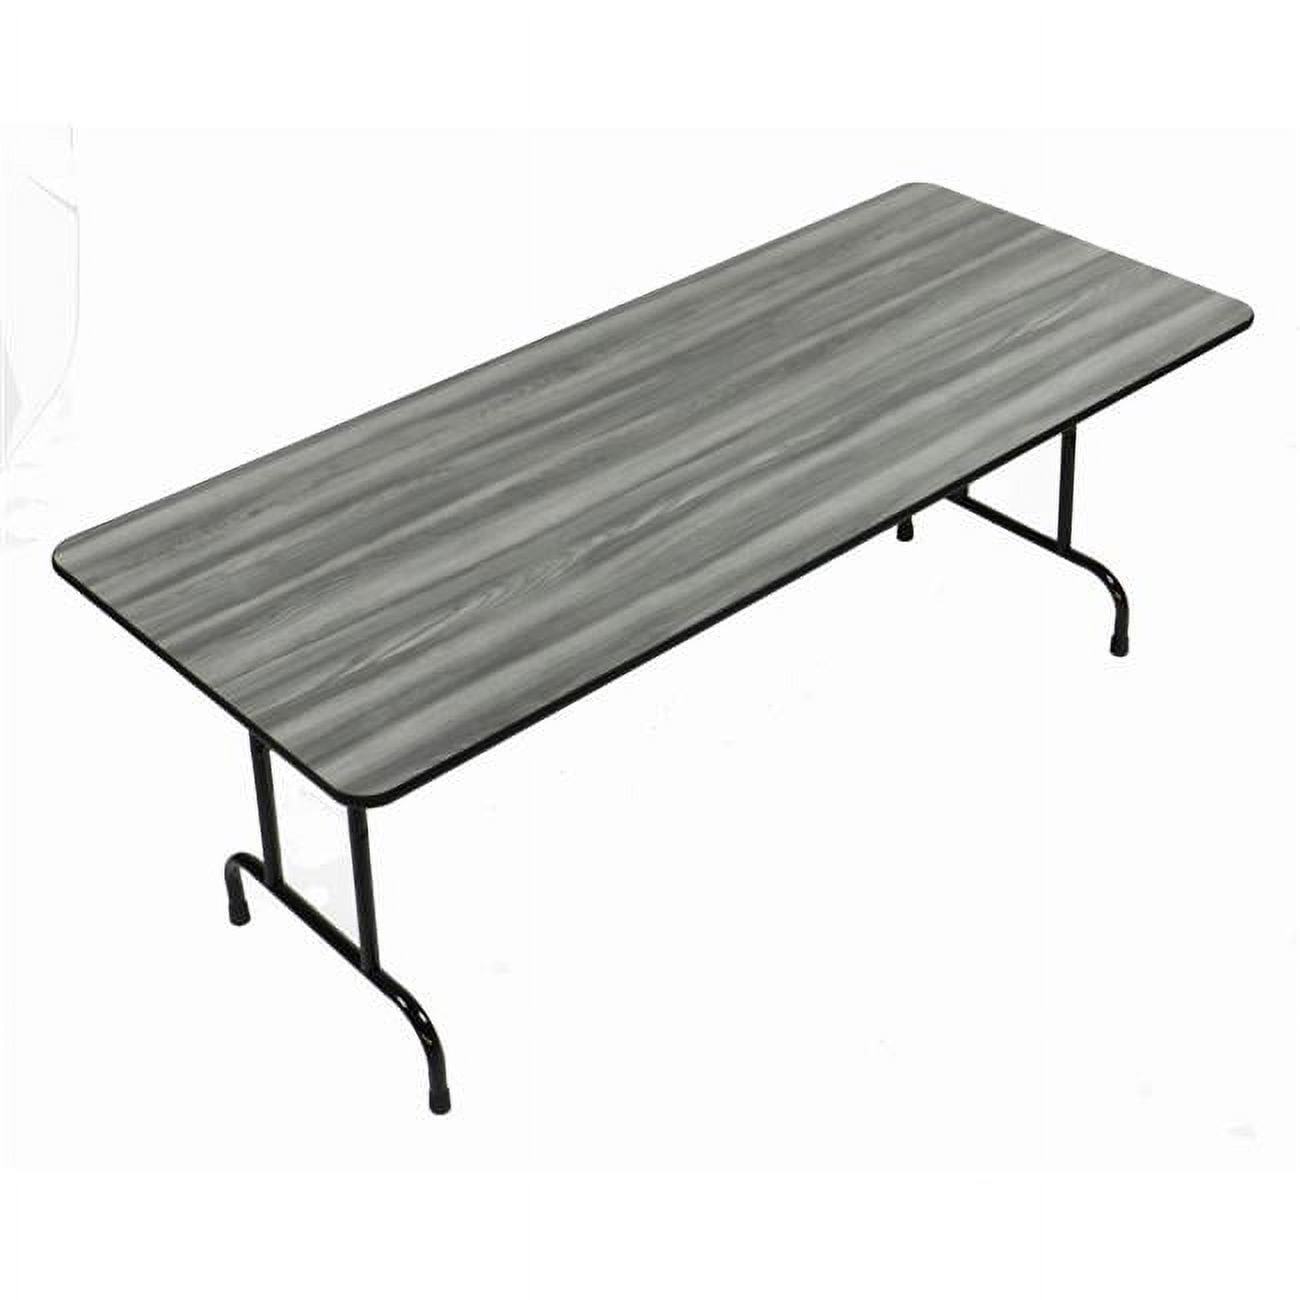 Cf2472px-52 0.75 In. High Pressure Rectangular Top Folding Tables, New England Driftwood - 24 X 72 In.